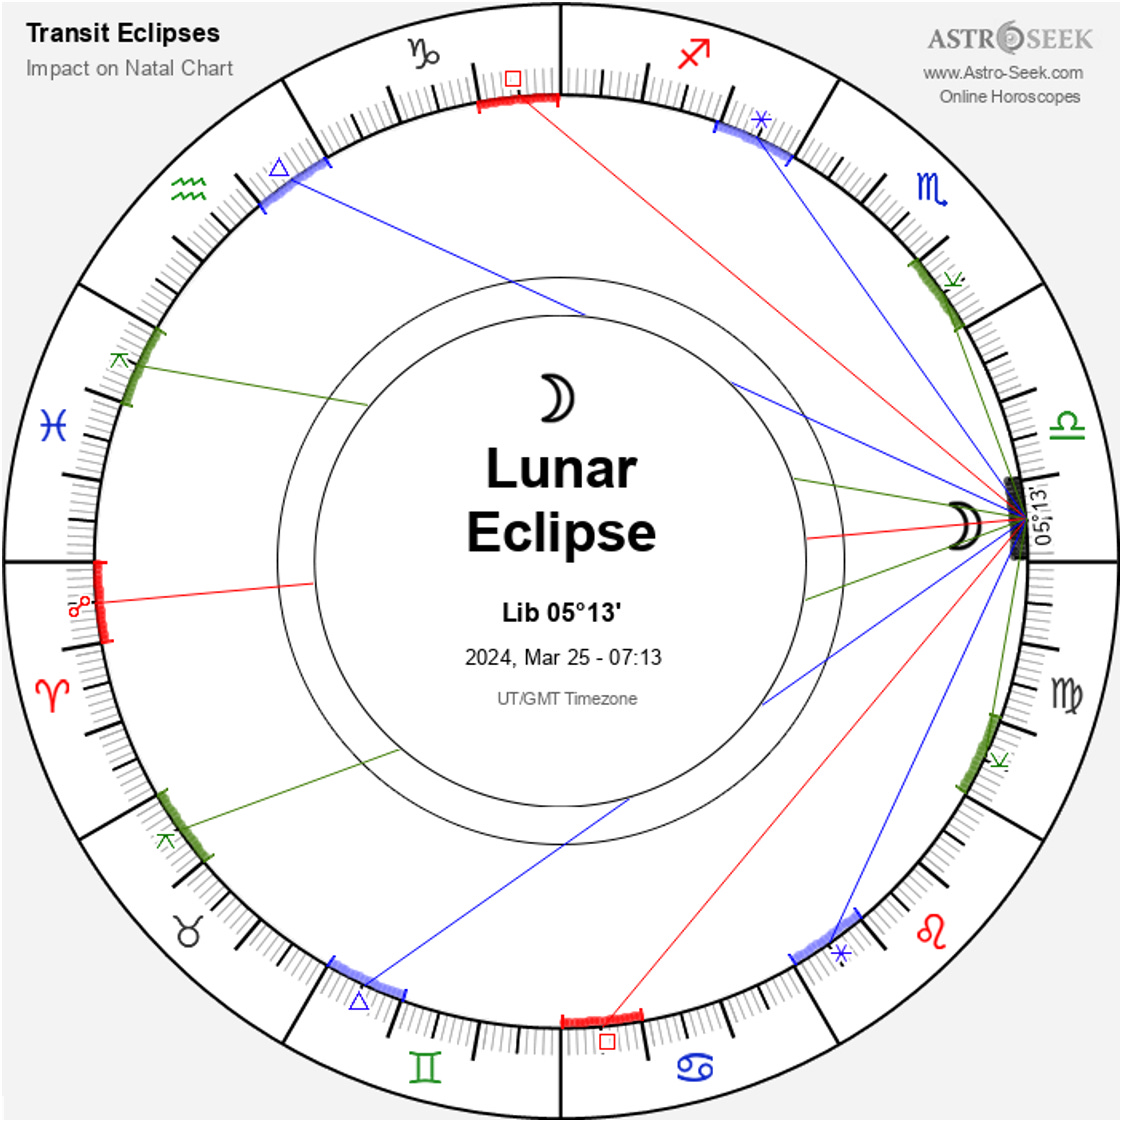 image of the aspects being made by the lunar eclipse